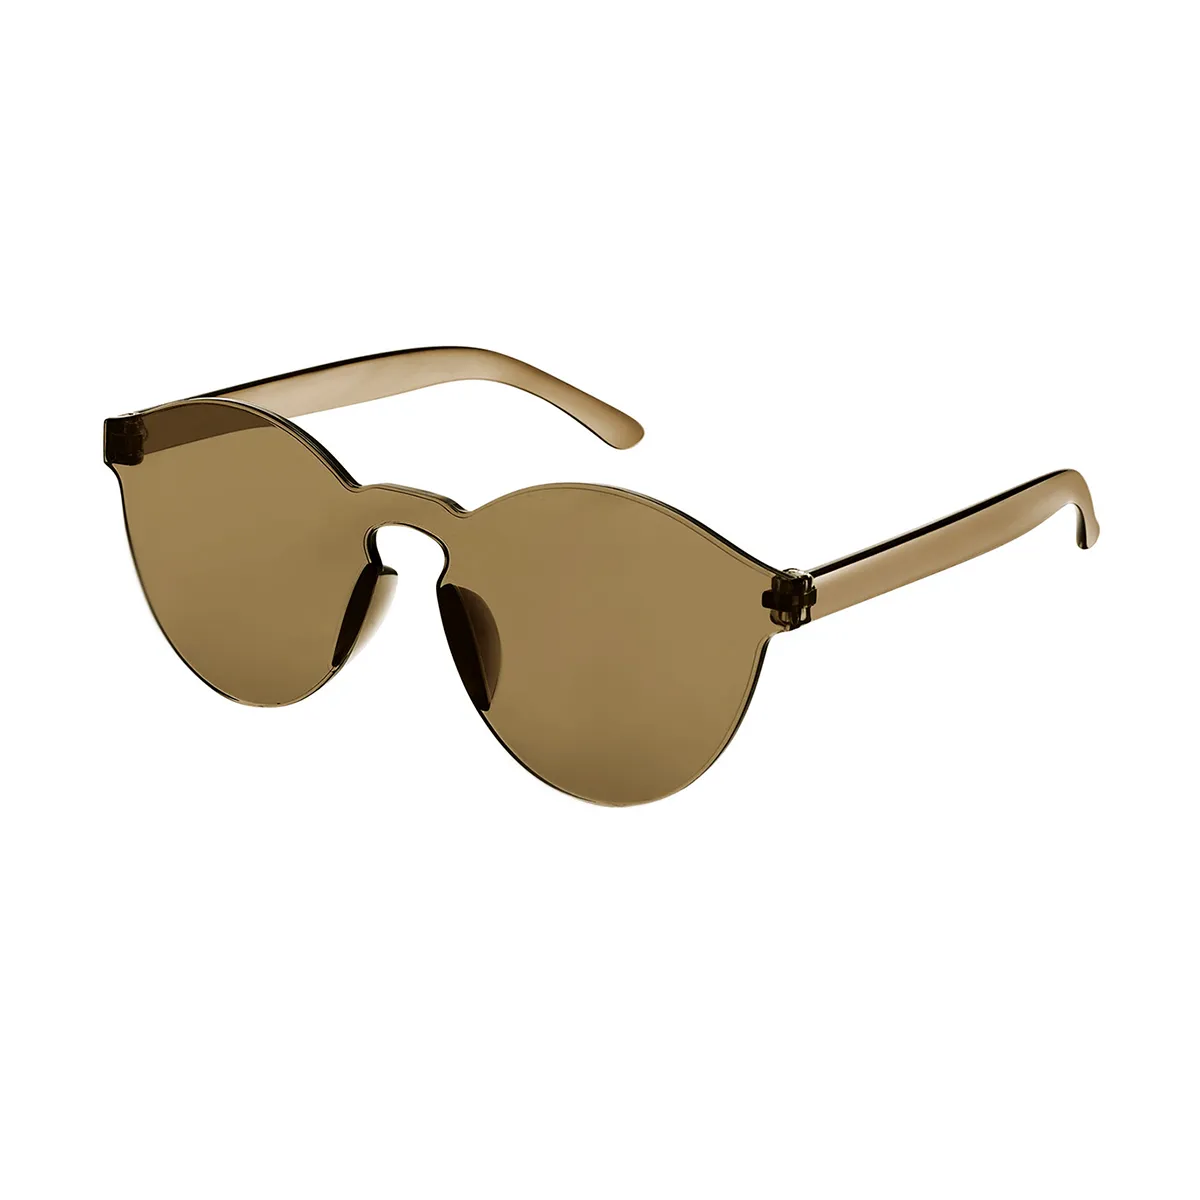 Calloway - Round Clear Brown Sunglasses for Women